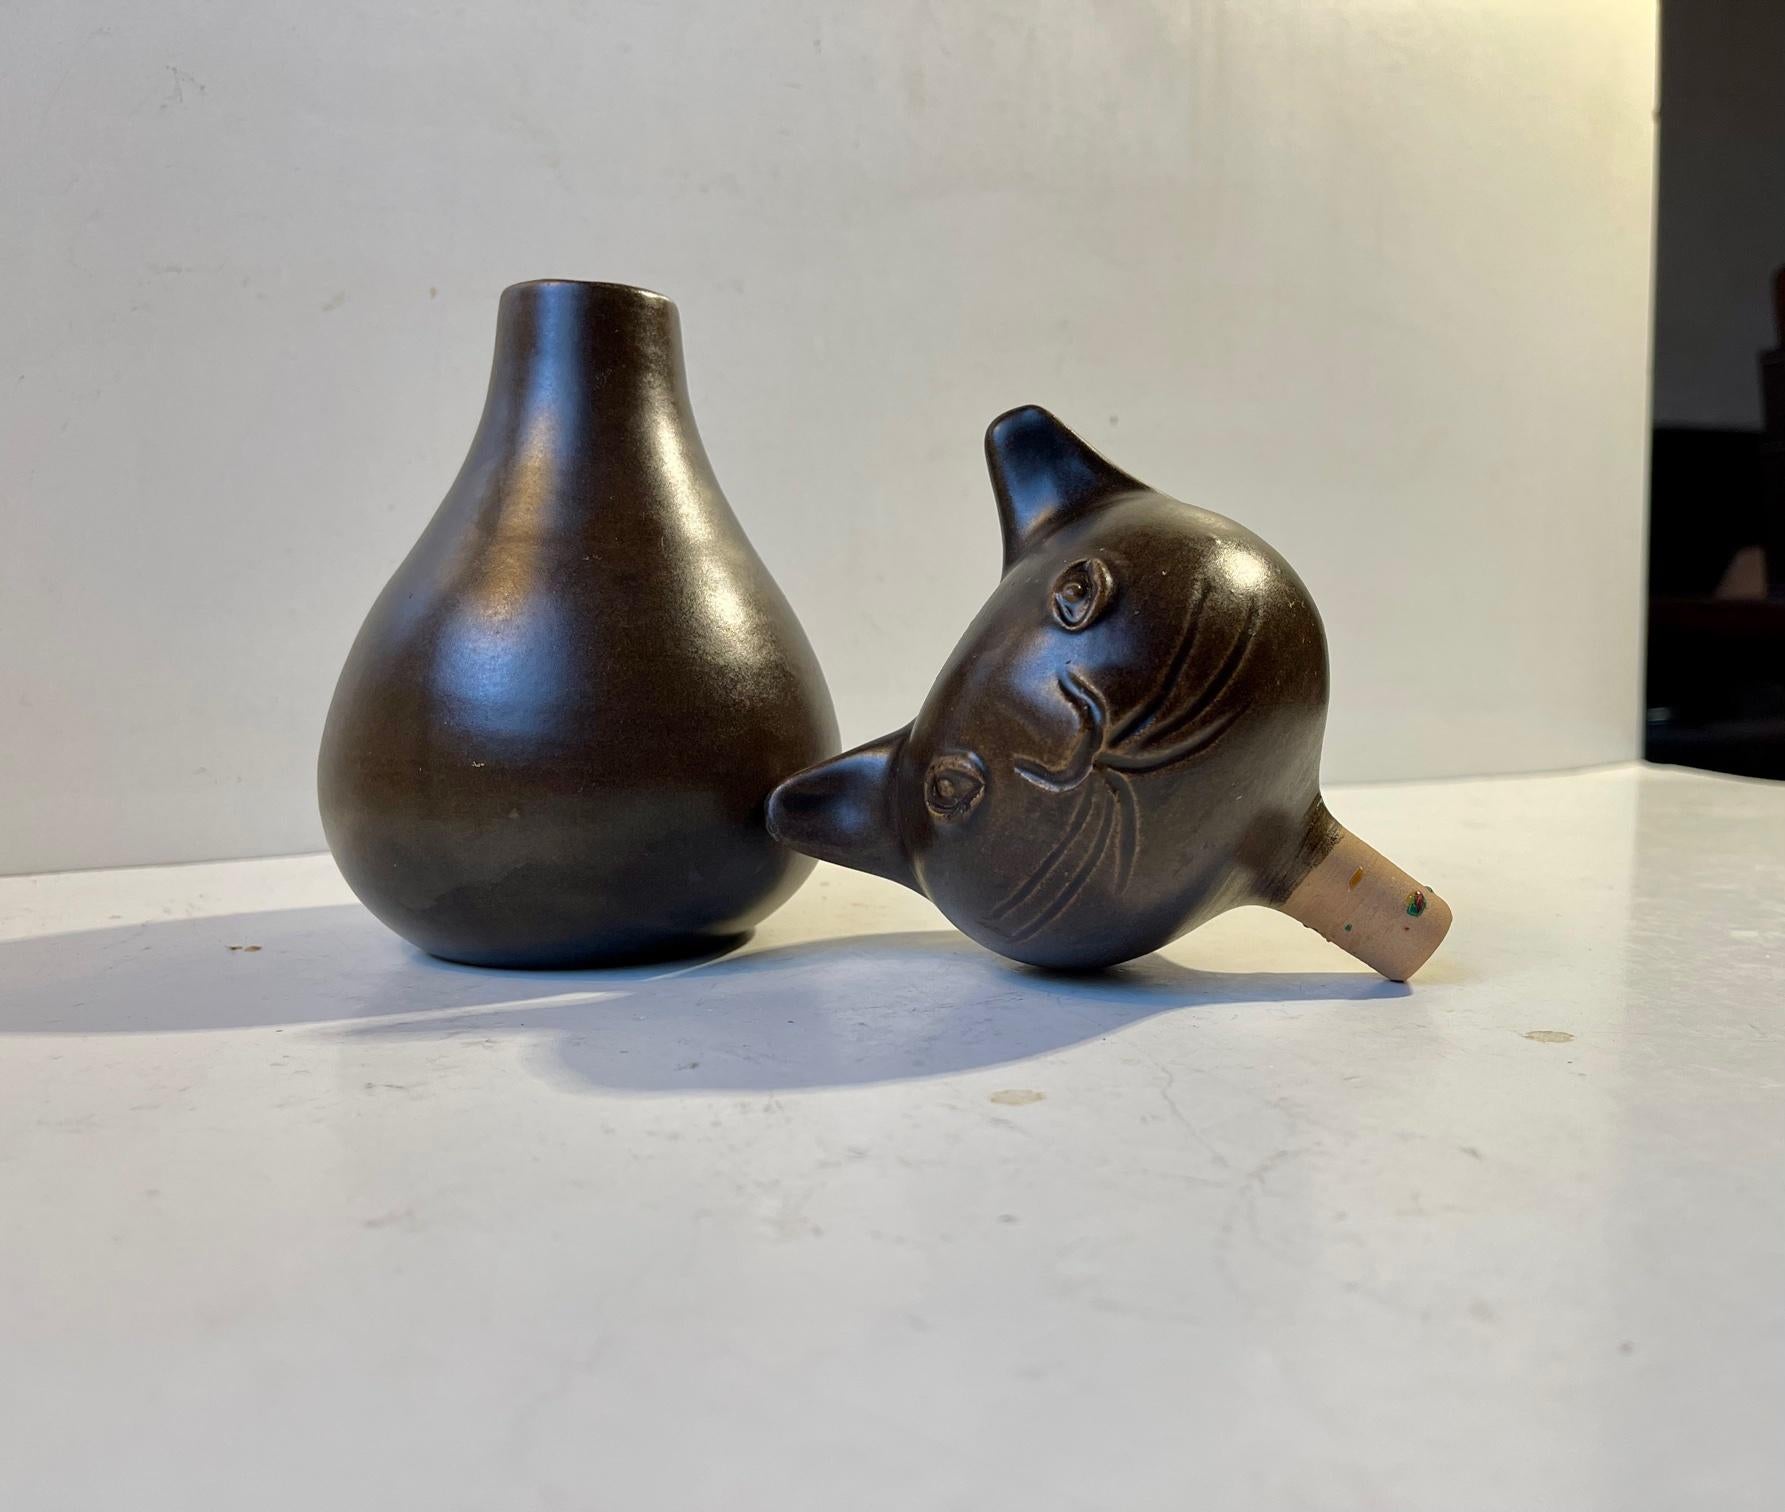 Unusual piece unique from the danish ceramist Bjerre. A dark brown glazed ceramic cat that is intended as a vase/decorative object but also can be used as a decanter. It is signed Bjerre and the year 75. Measurements: H: 21 cm, W: 9 cm (at the head).